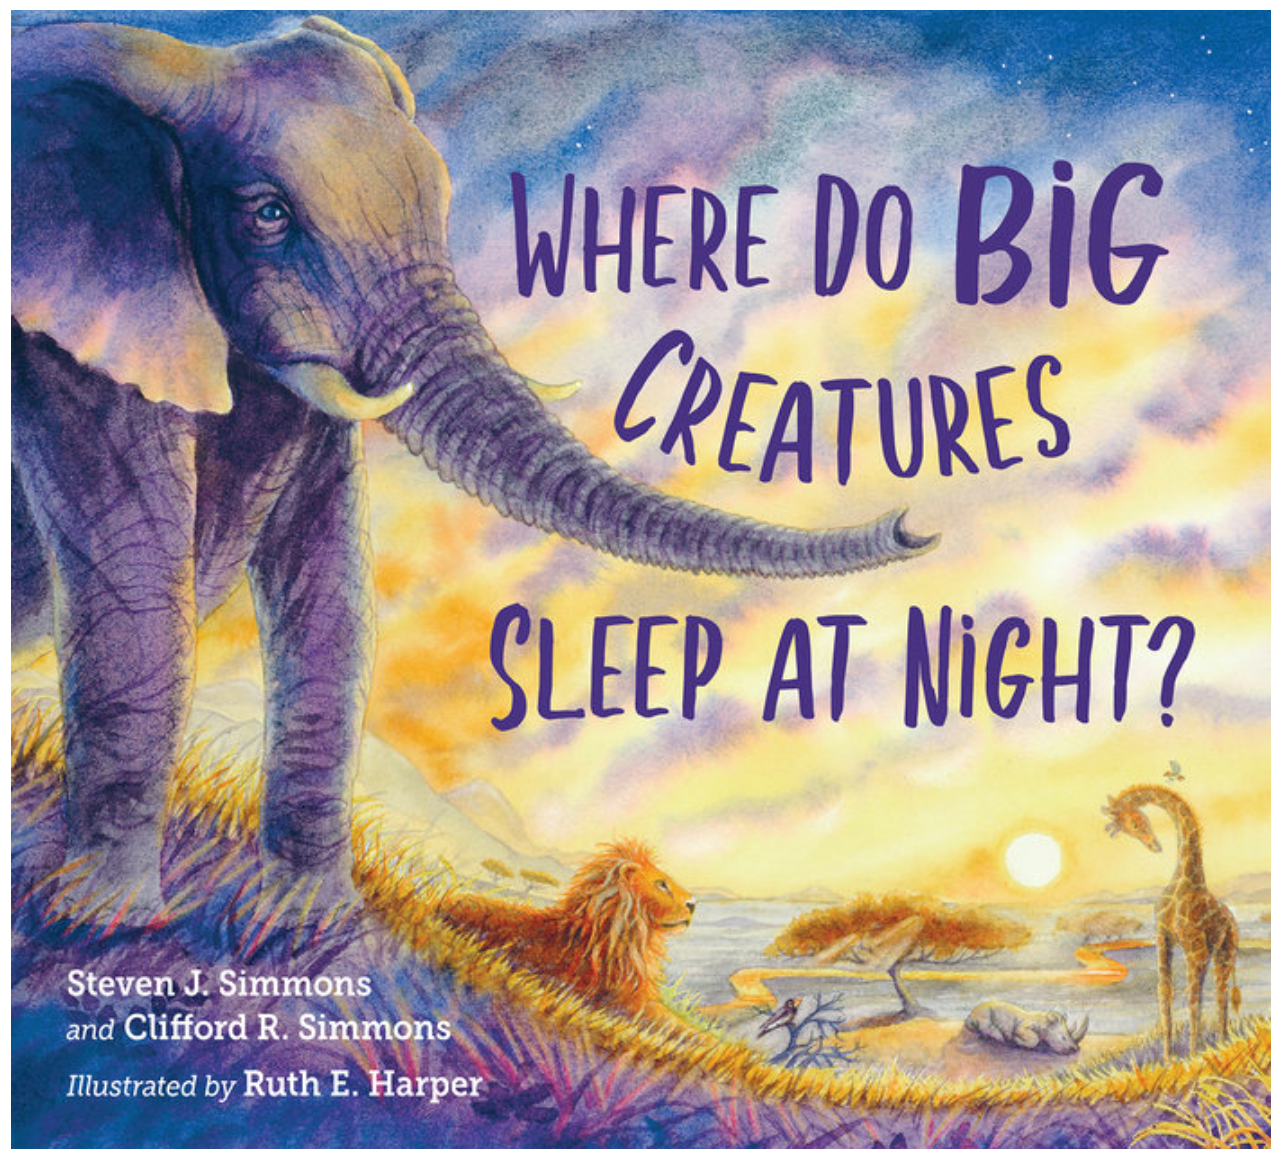 Illustrated children’s book cover from ‘Where Do Big Creatures Sleep at Night?’